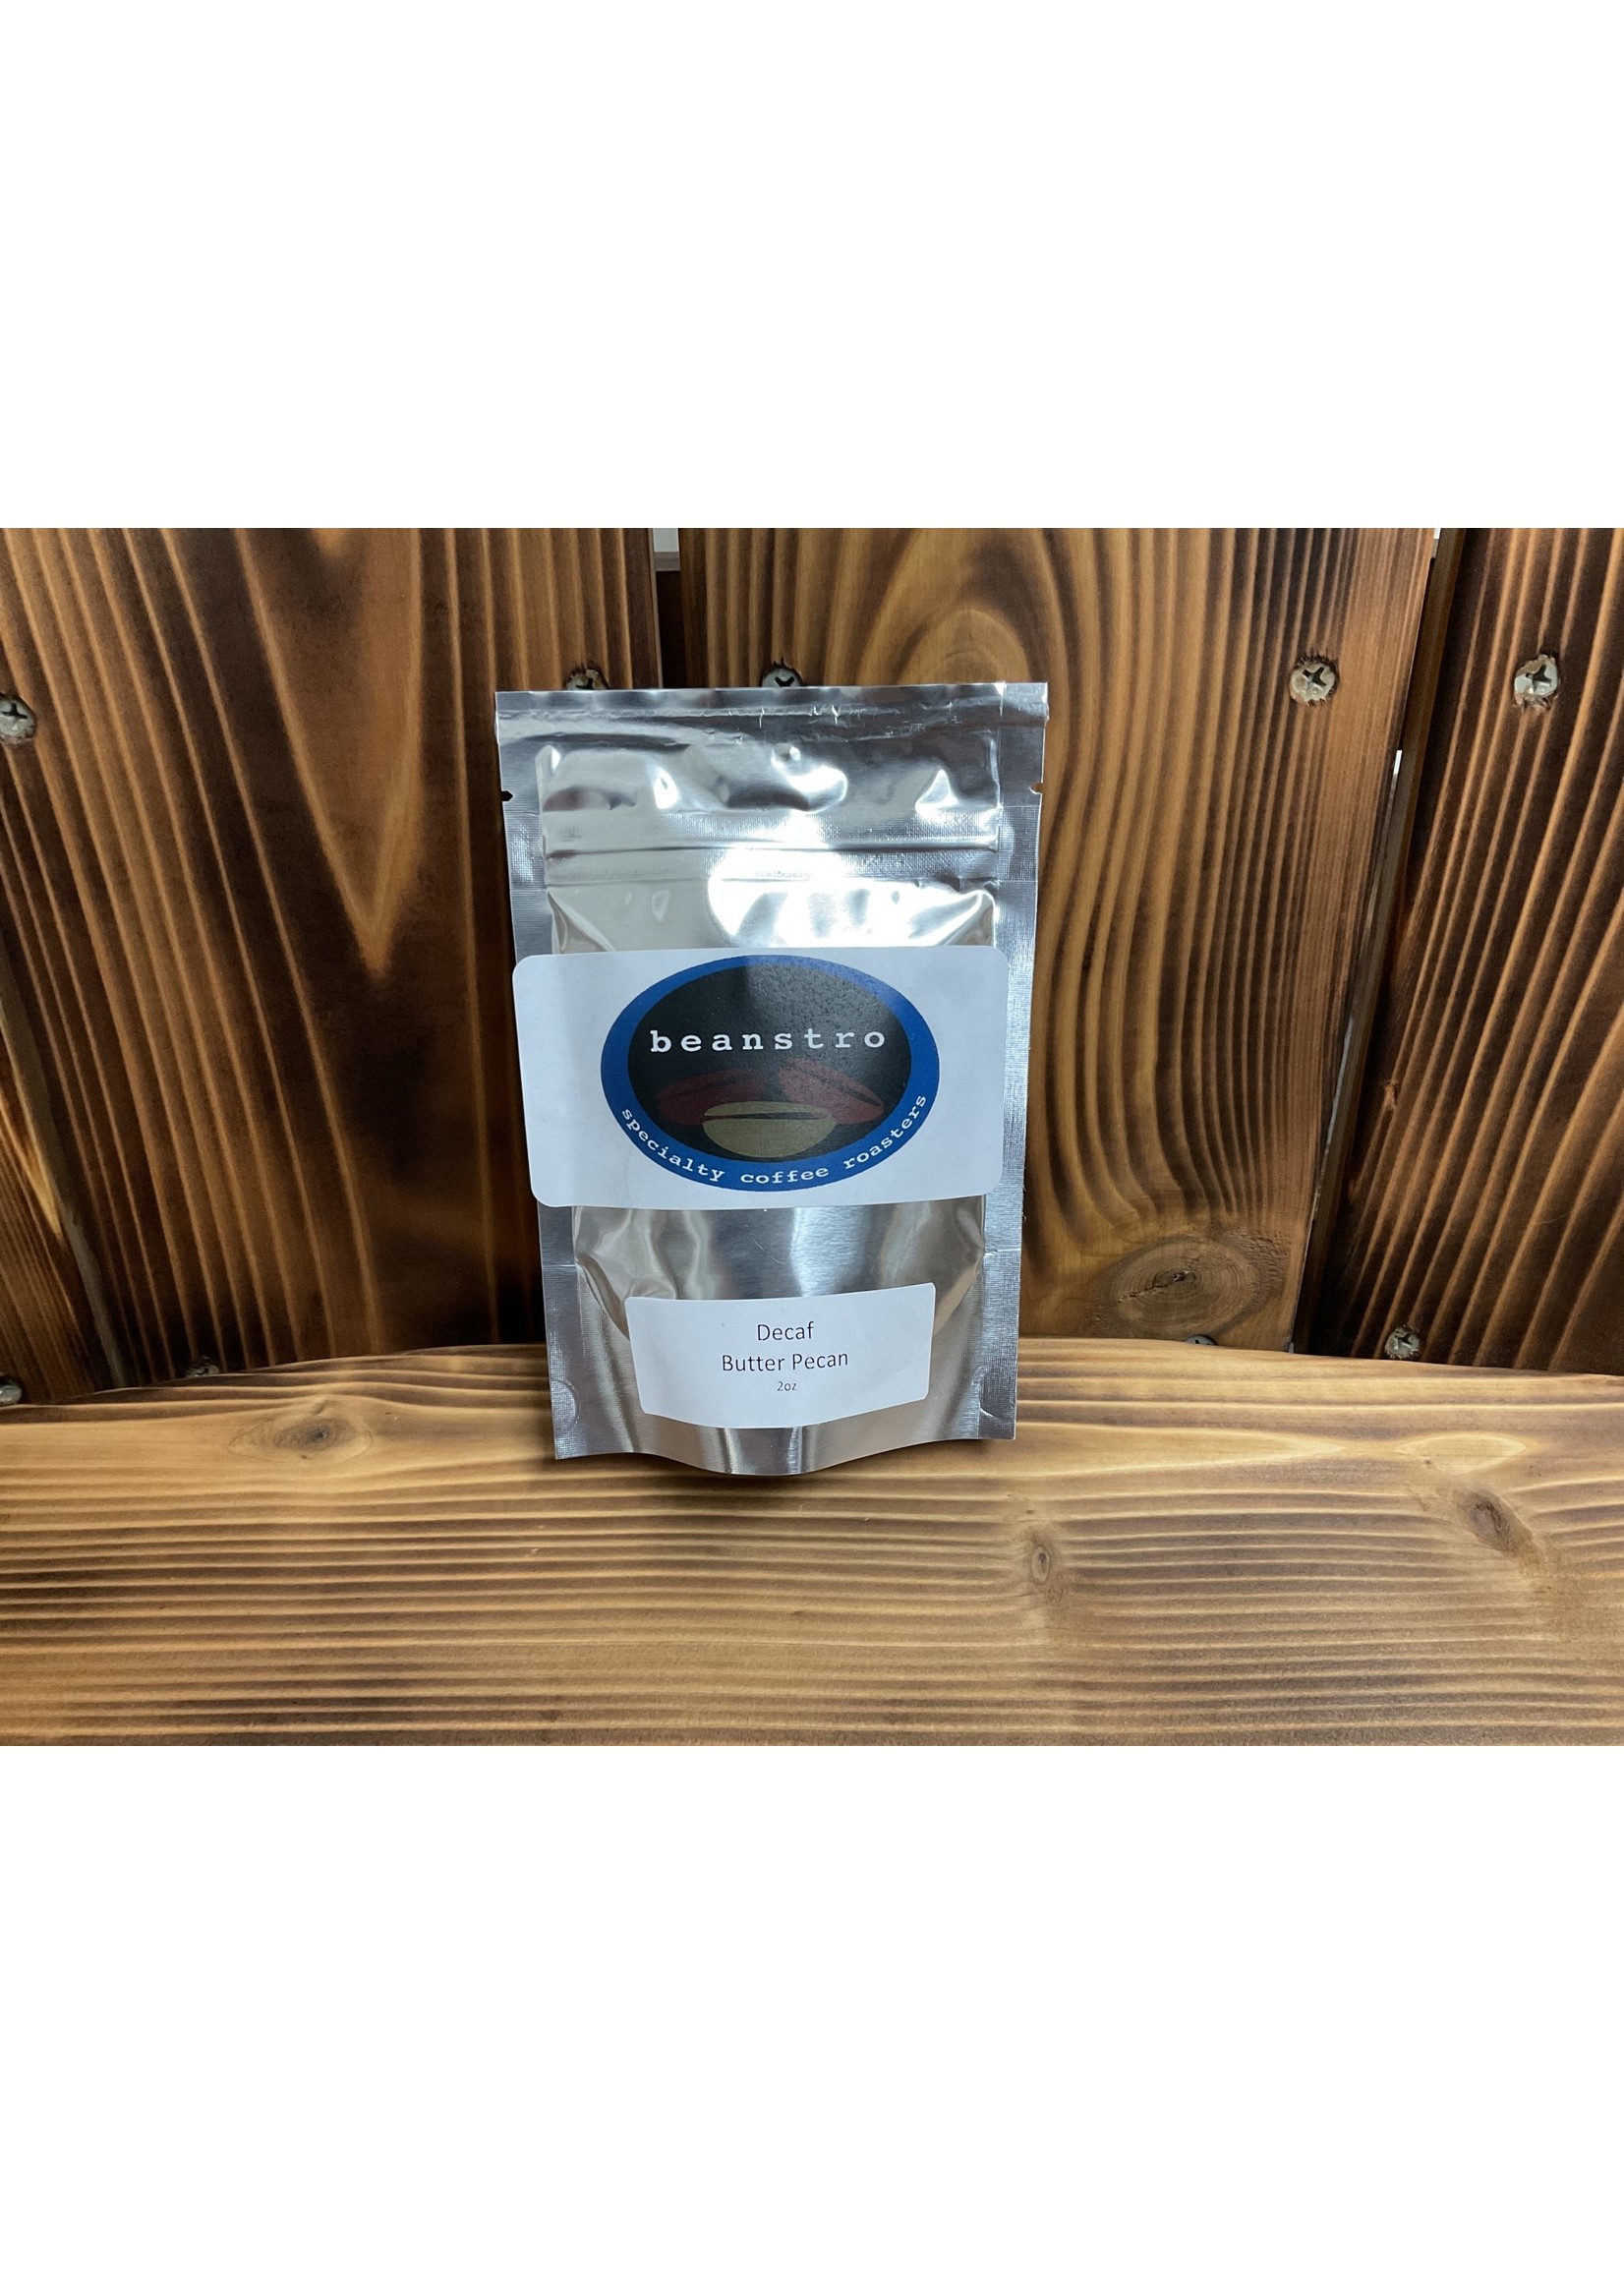 Beanstro Specialty Coffee Roasters Beanstro 2oz Butter Pecan Decaf